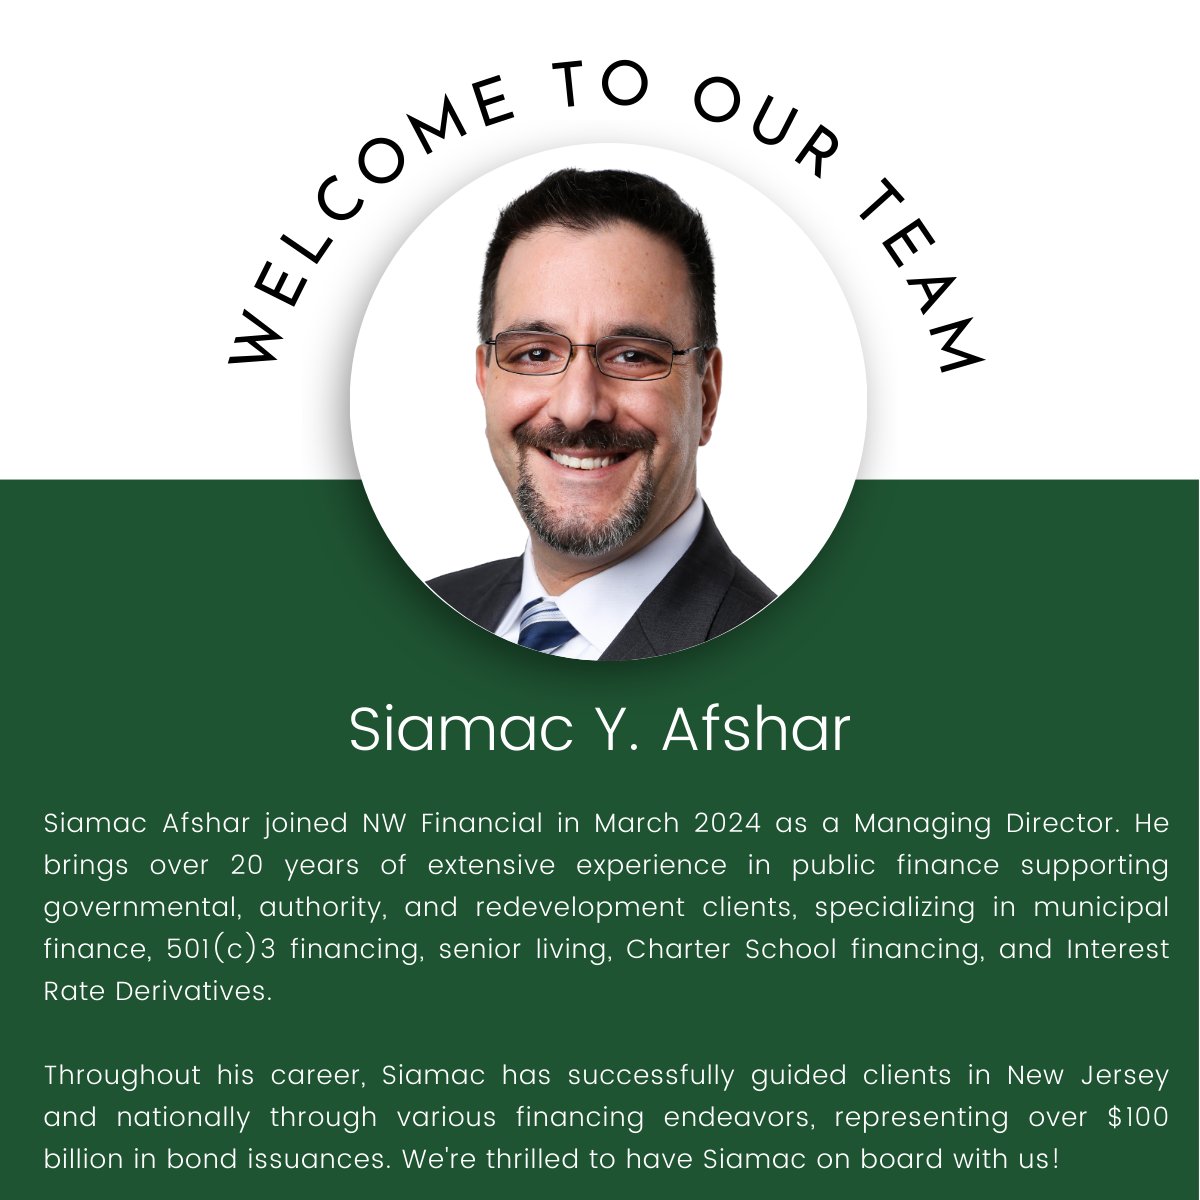 We're thrilled to welcome Siamac Y. Afshar to our team! 🌟 His expertise and enthusiasm are sure to bring fresh perspectives and new ideas to our projects. Join us in extending a warm welcome! 
#NewTeamMember #TeamGrowth #NWFinancial